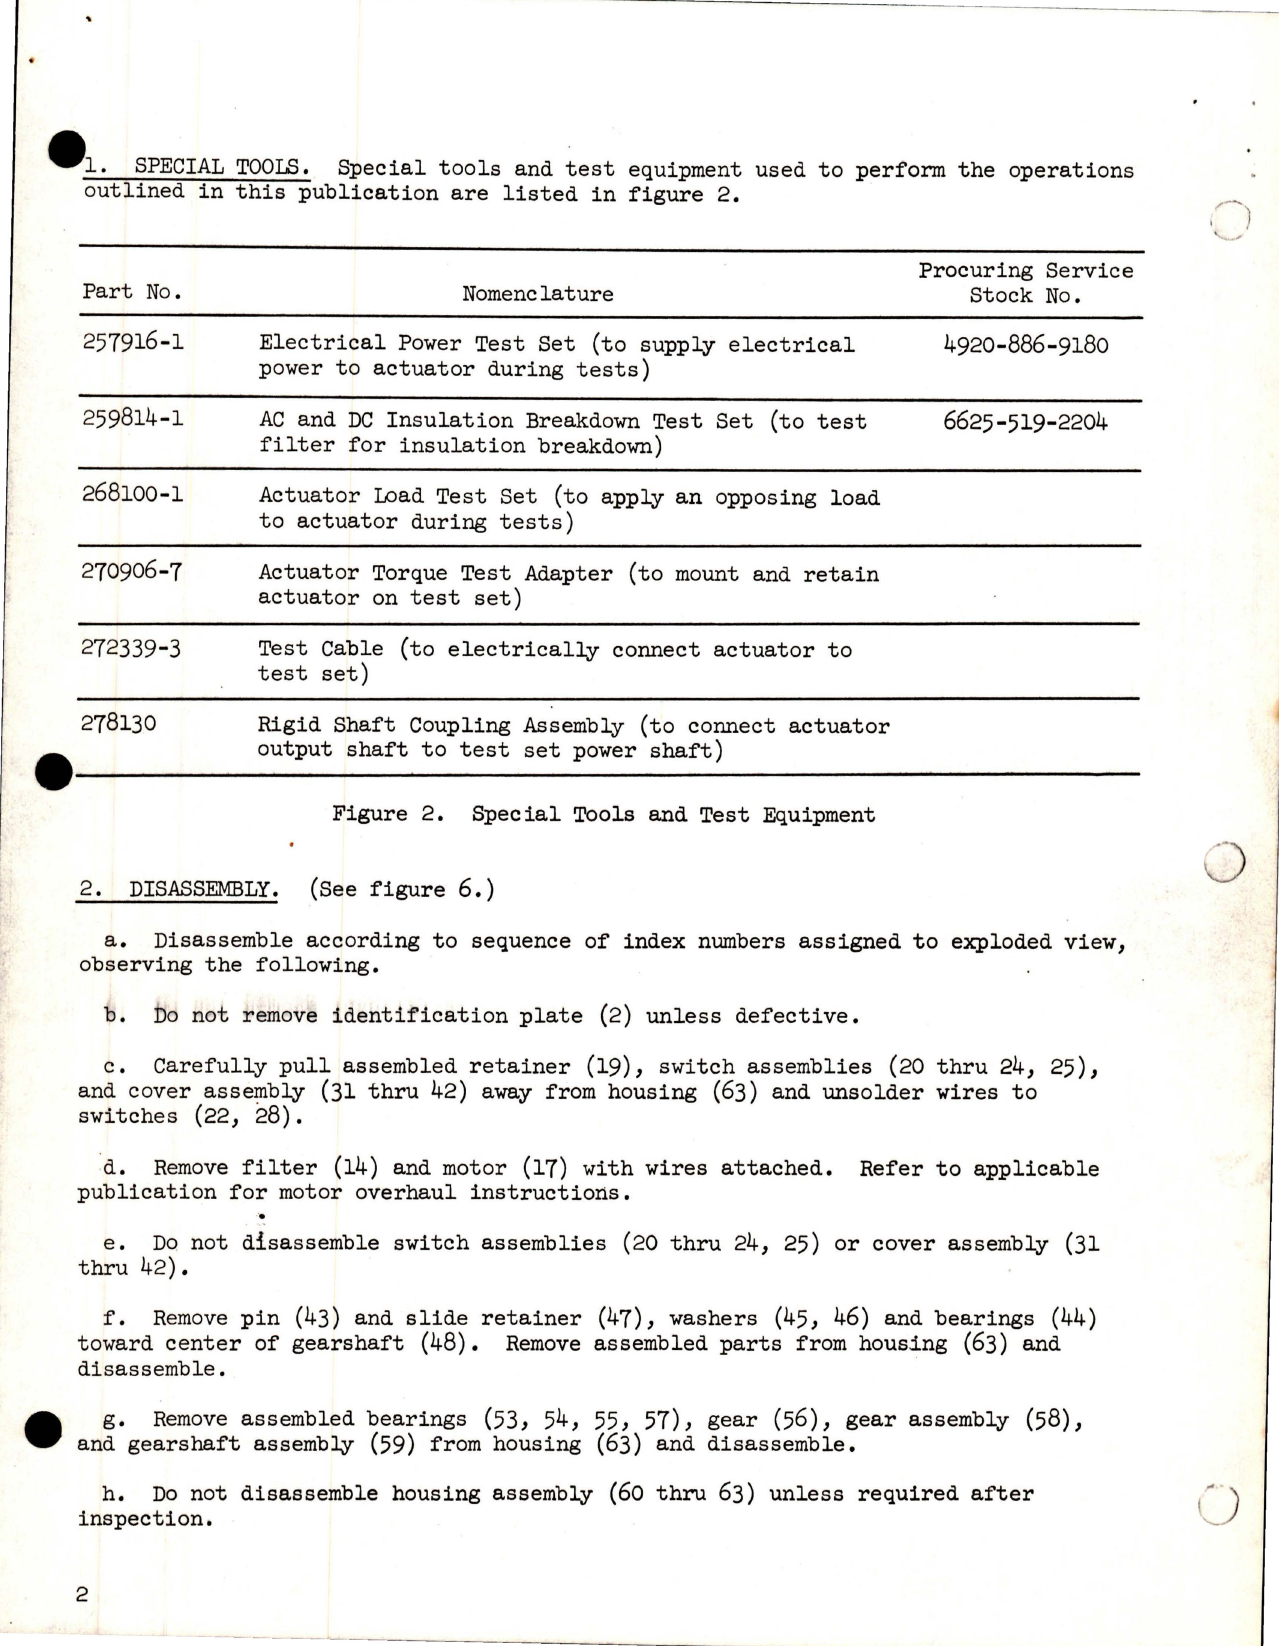 Sample page 5 from AirCorps Library document: Overhaul Instructions with Parts for Electromechanical Rotary Actuator - Part 541214-1-2 